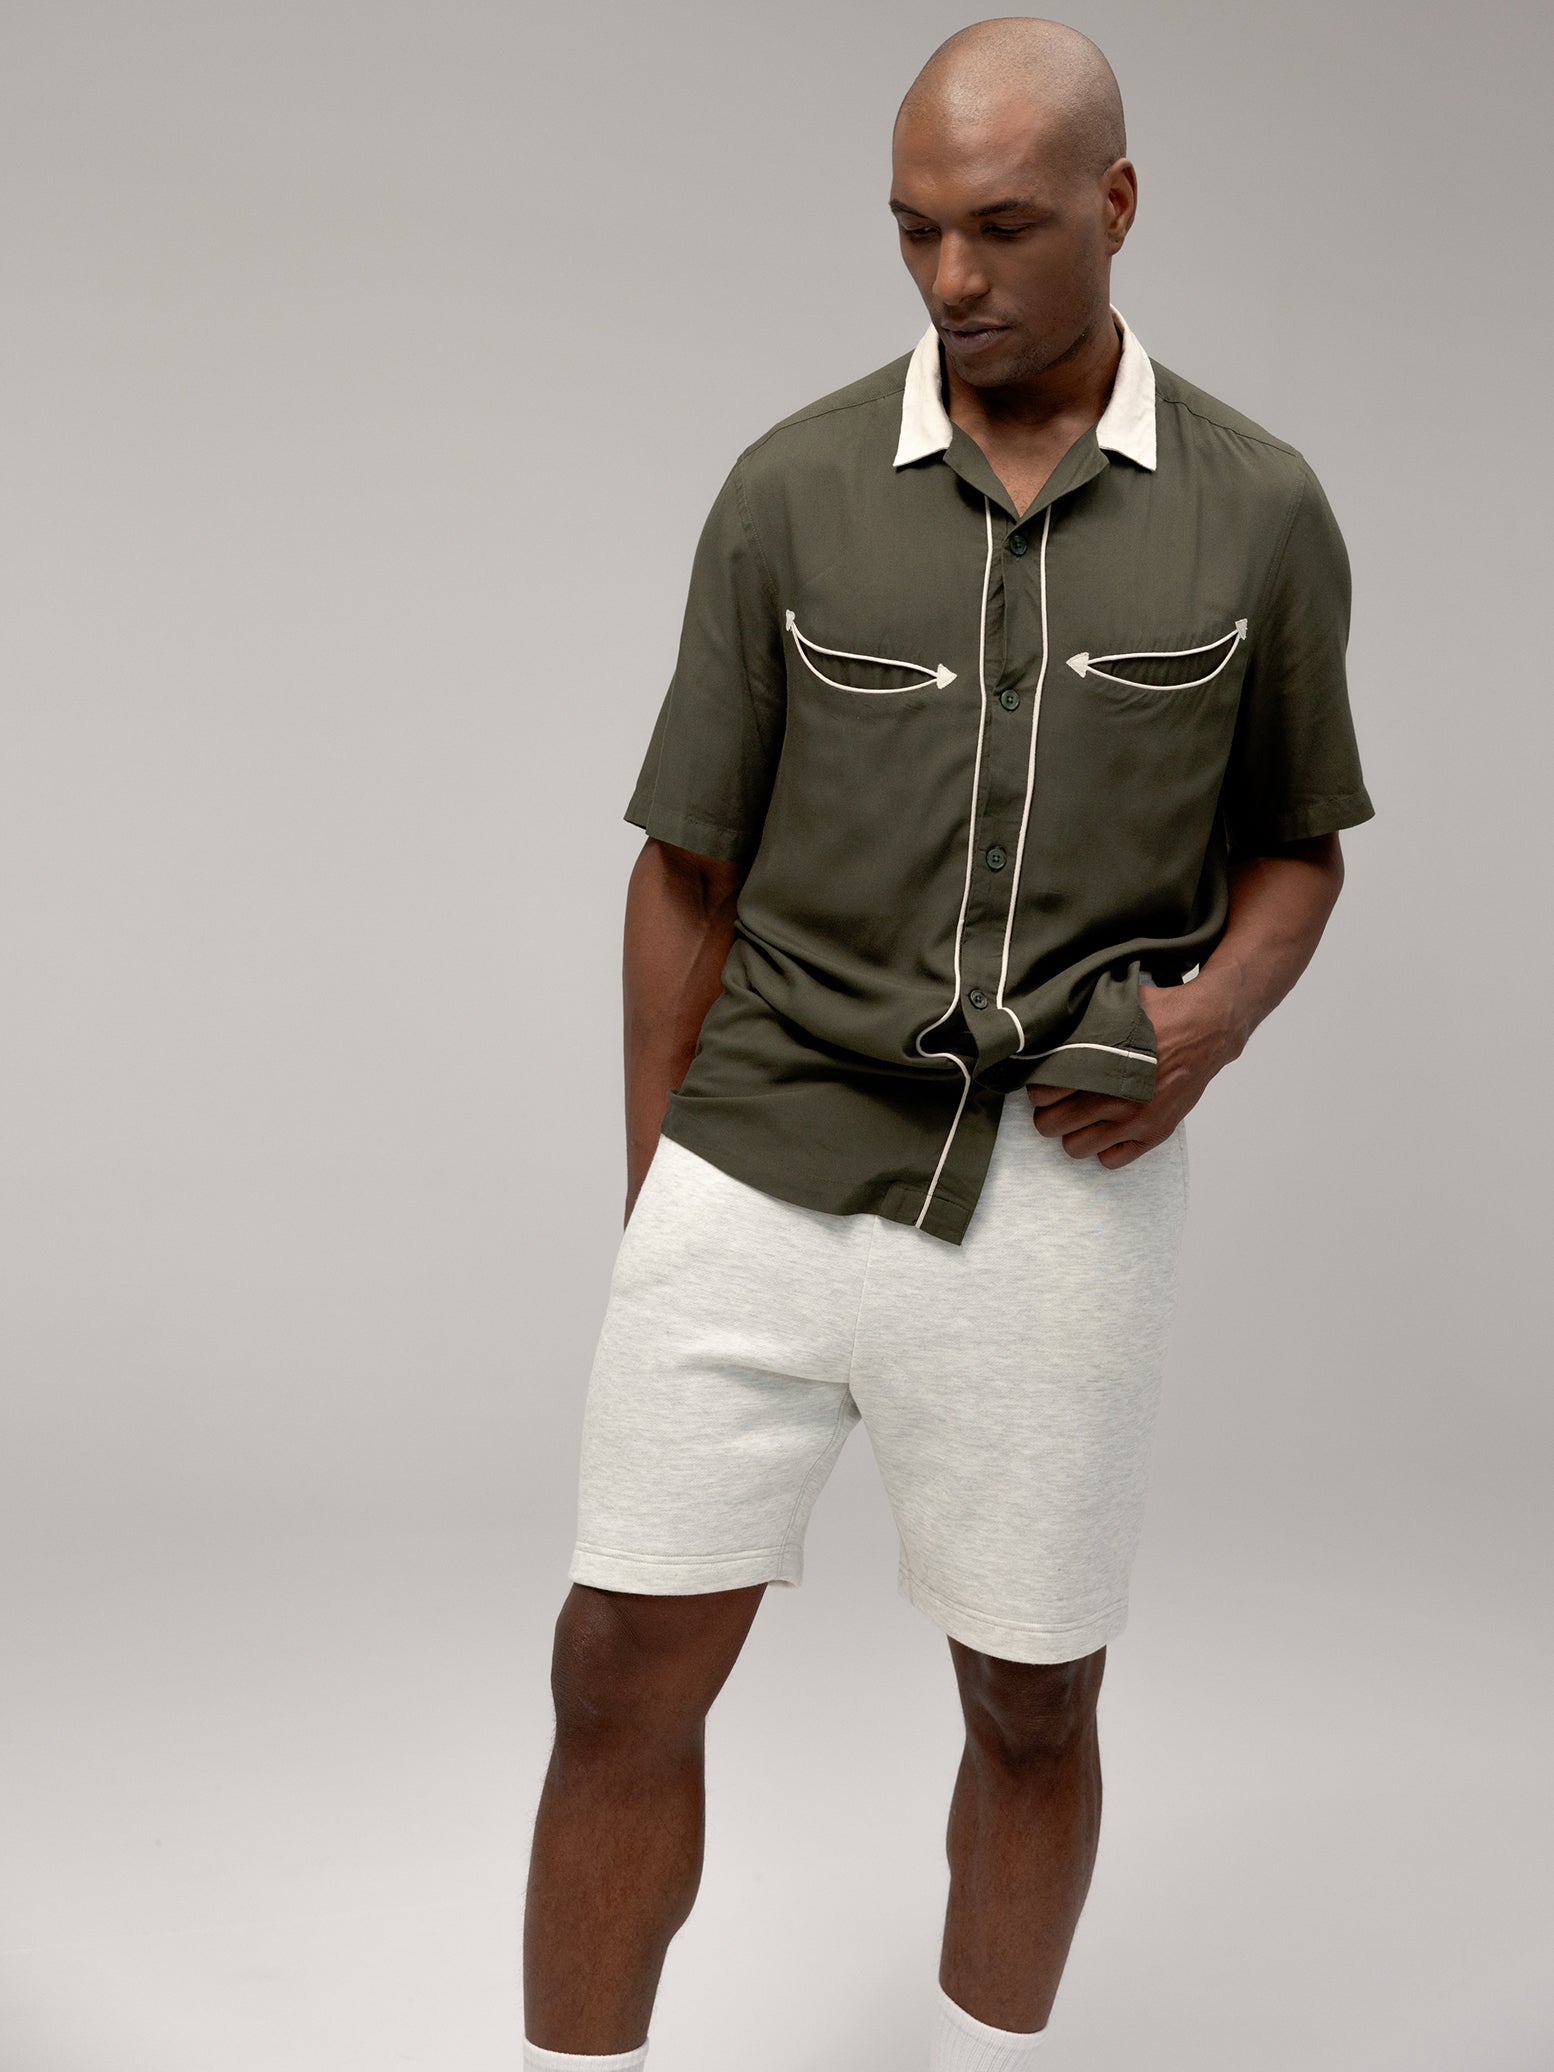 Man wearing heather grey cityscape shorts and dark green button down 